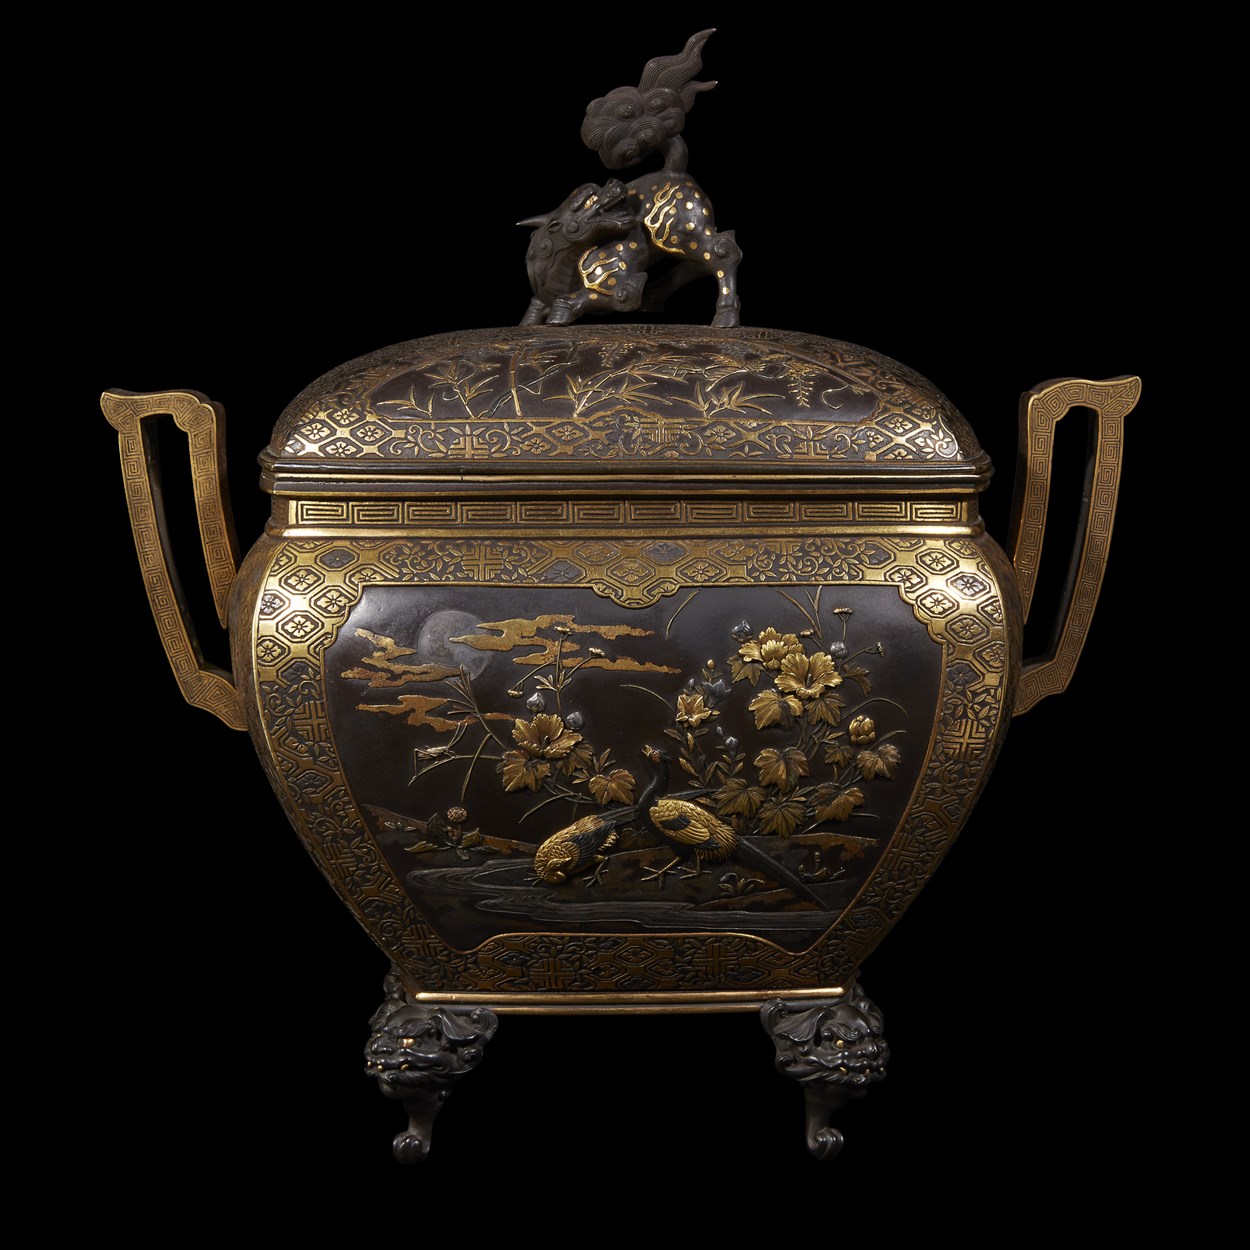 Lot 116 - An impressive Japanese parcel gilt and mixed metal patinated bronze koro and cover